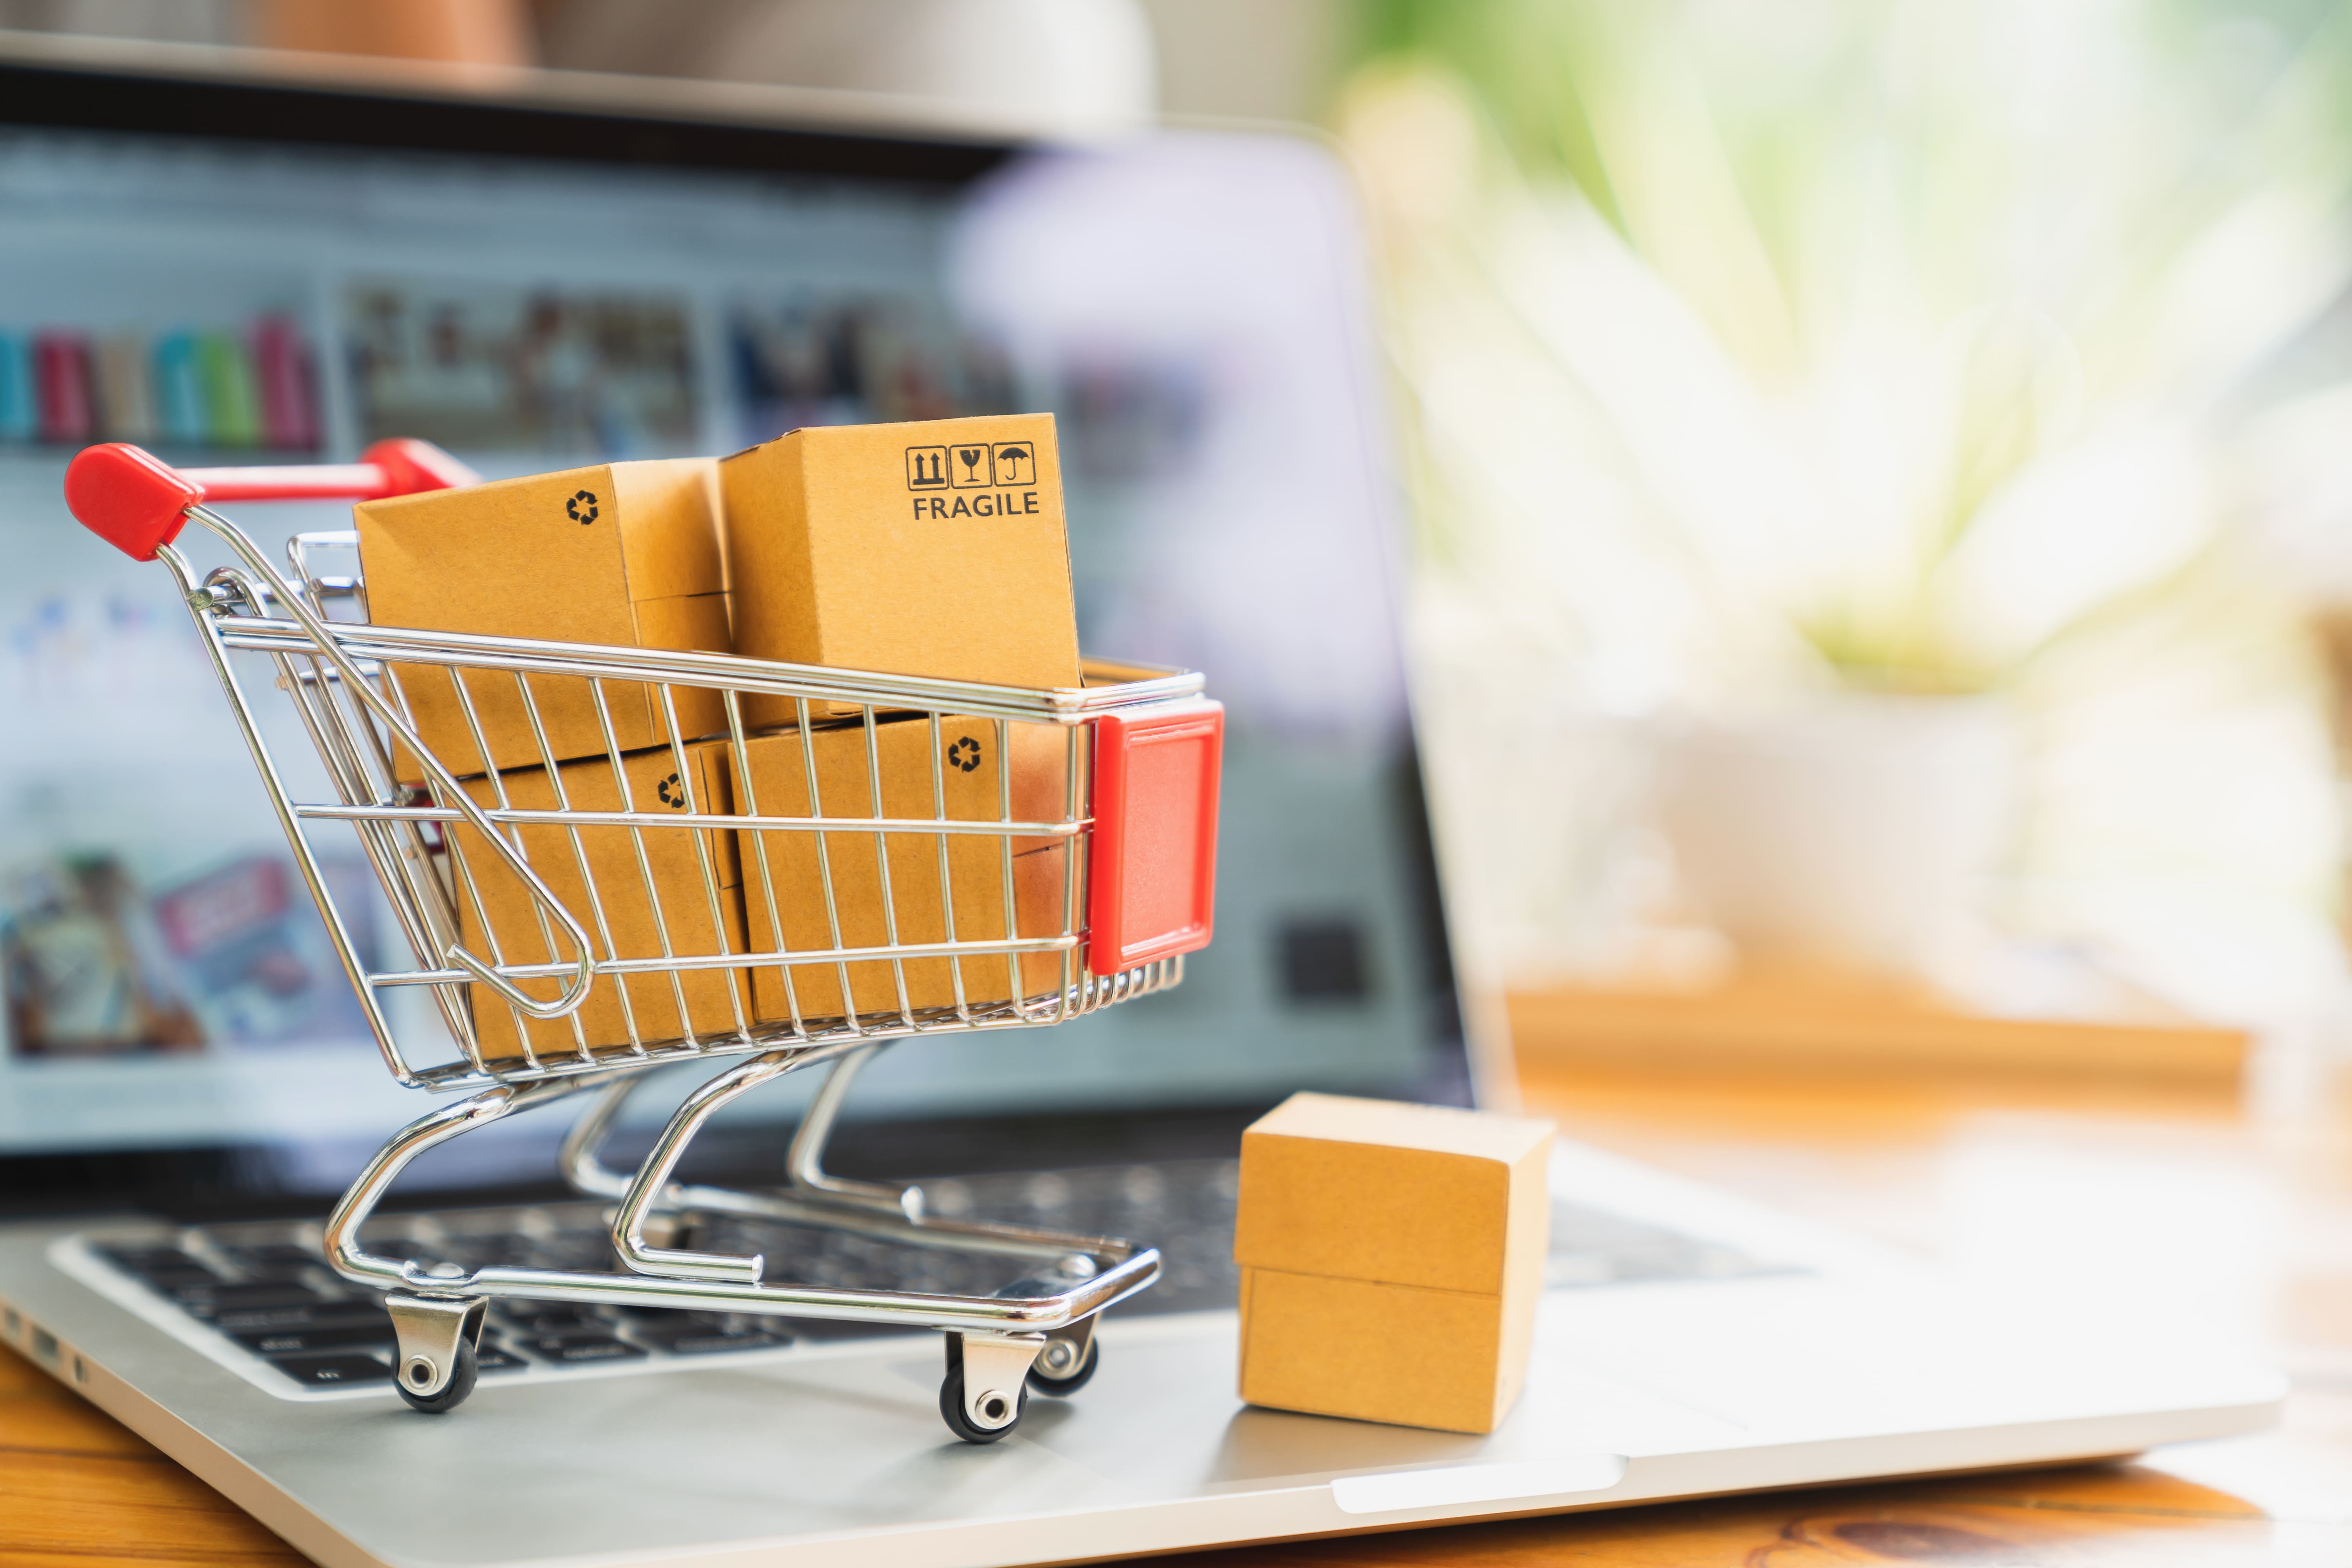 online-shopping-delivery-concept-product-package-boxes-cart-laptop